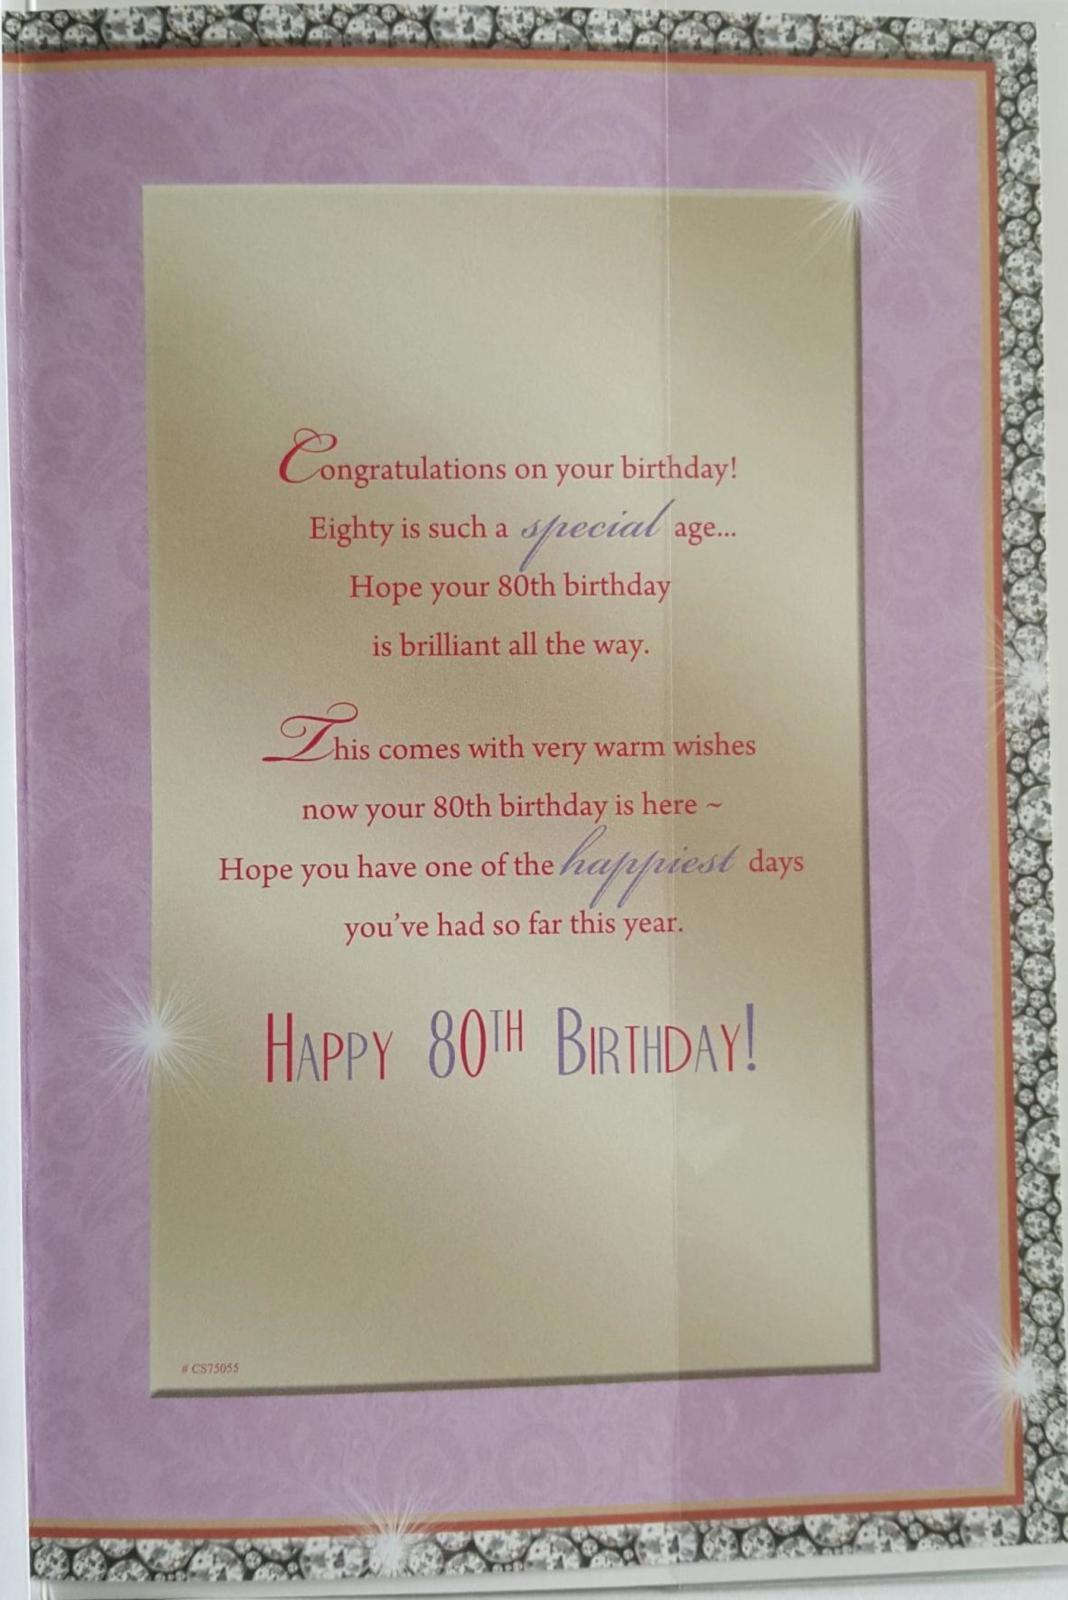 Celebrity Style On Your 80th Birthday Card